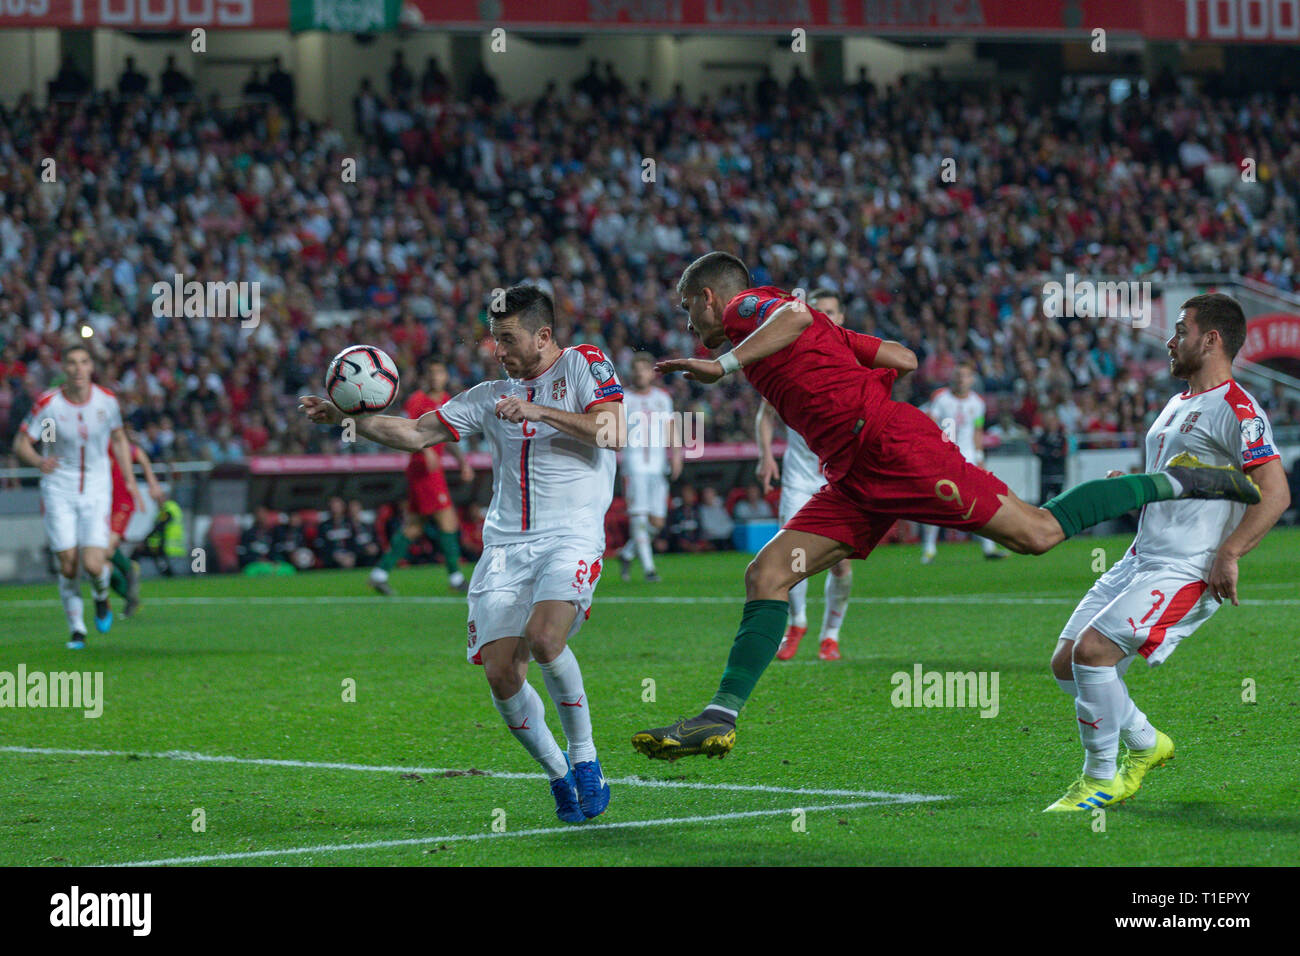 Lisbon, Portugal. 25th Mar, 2019. March 25, 2019. Lisbon, Portugal. Portugal's and Sevilla forward Andre Silva (9) and Serbia's and Astana defender Antonio Rukavina (2) during the European Championship 2020 Qualifying Round between Portugal and Serbia Credit: Alexandre de Sousa/Alamy Live News Stock Photo